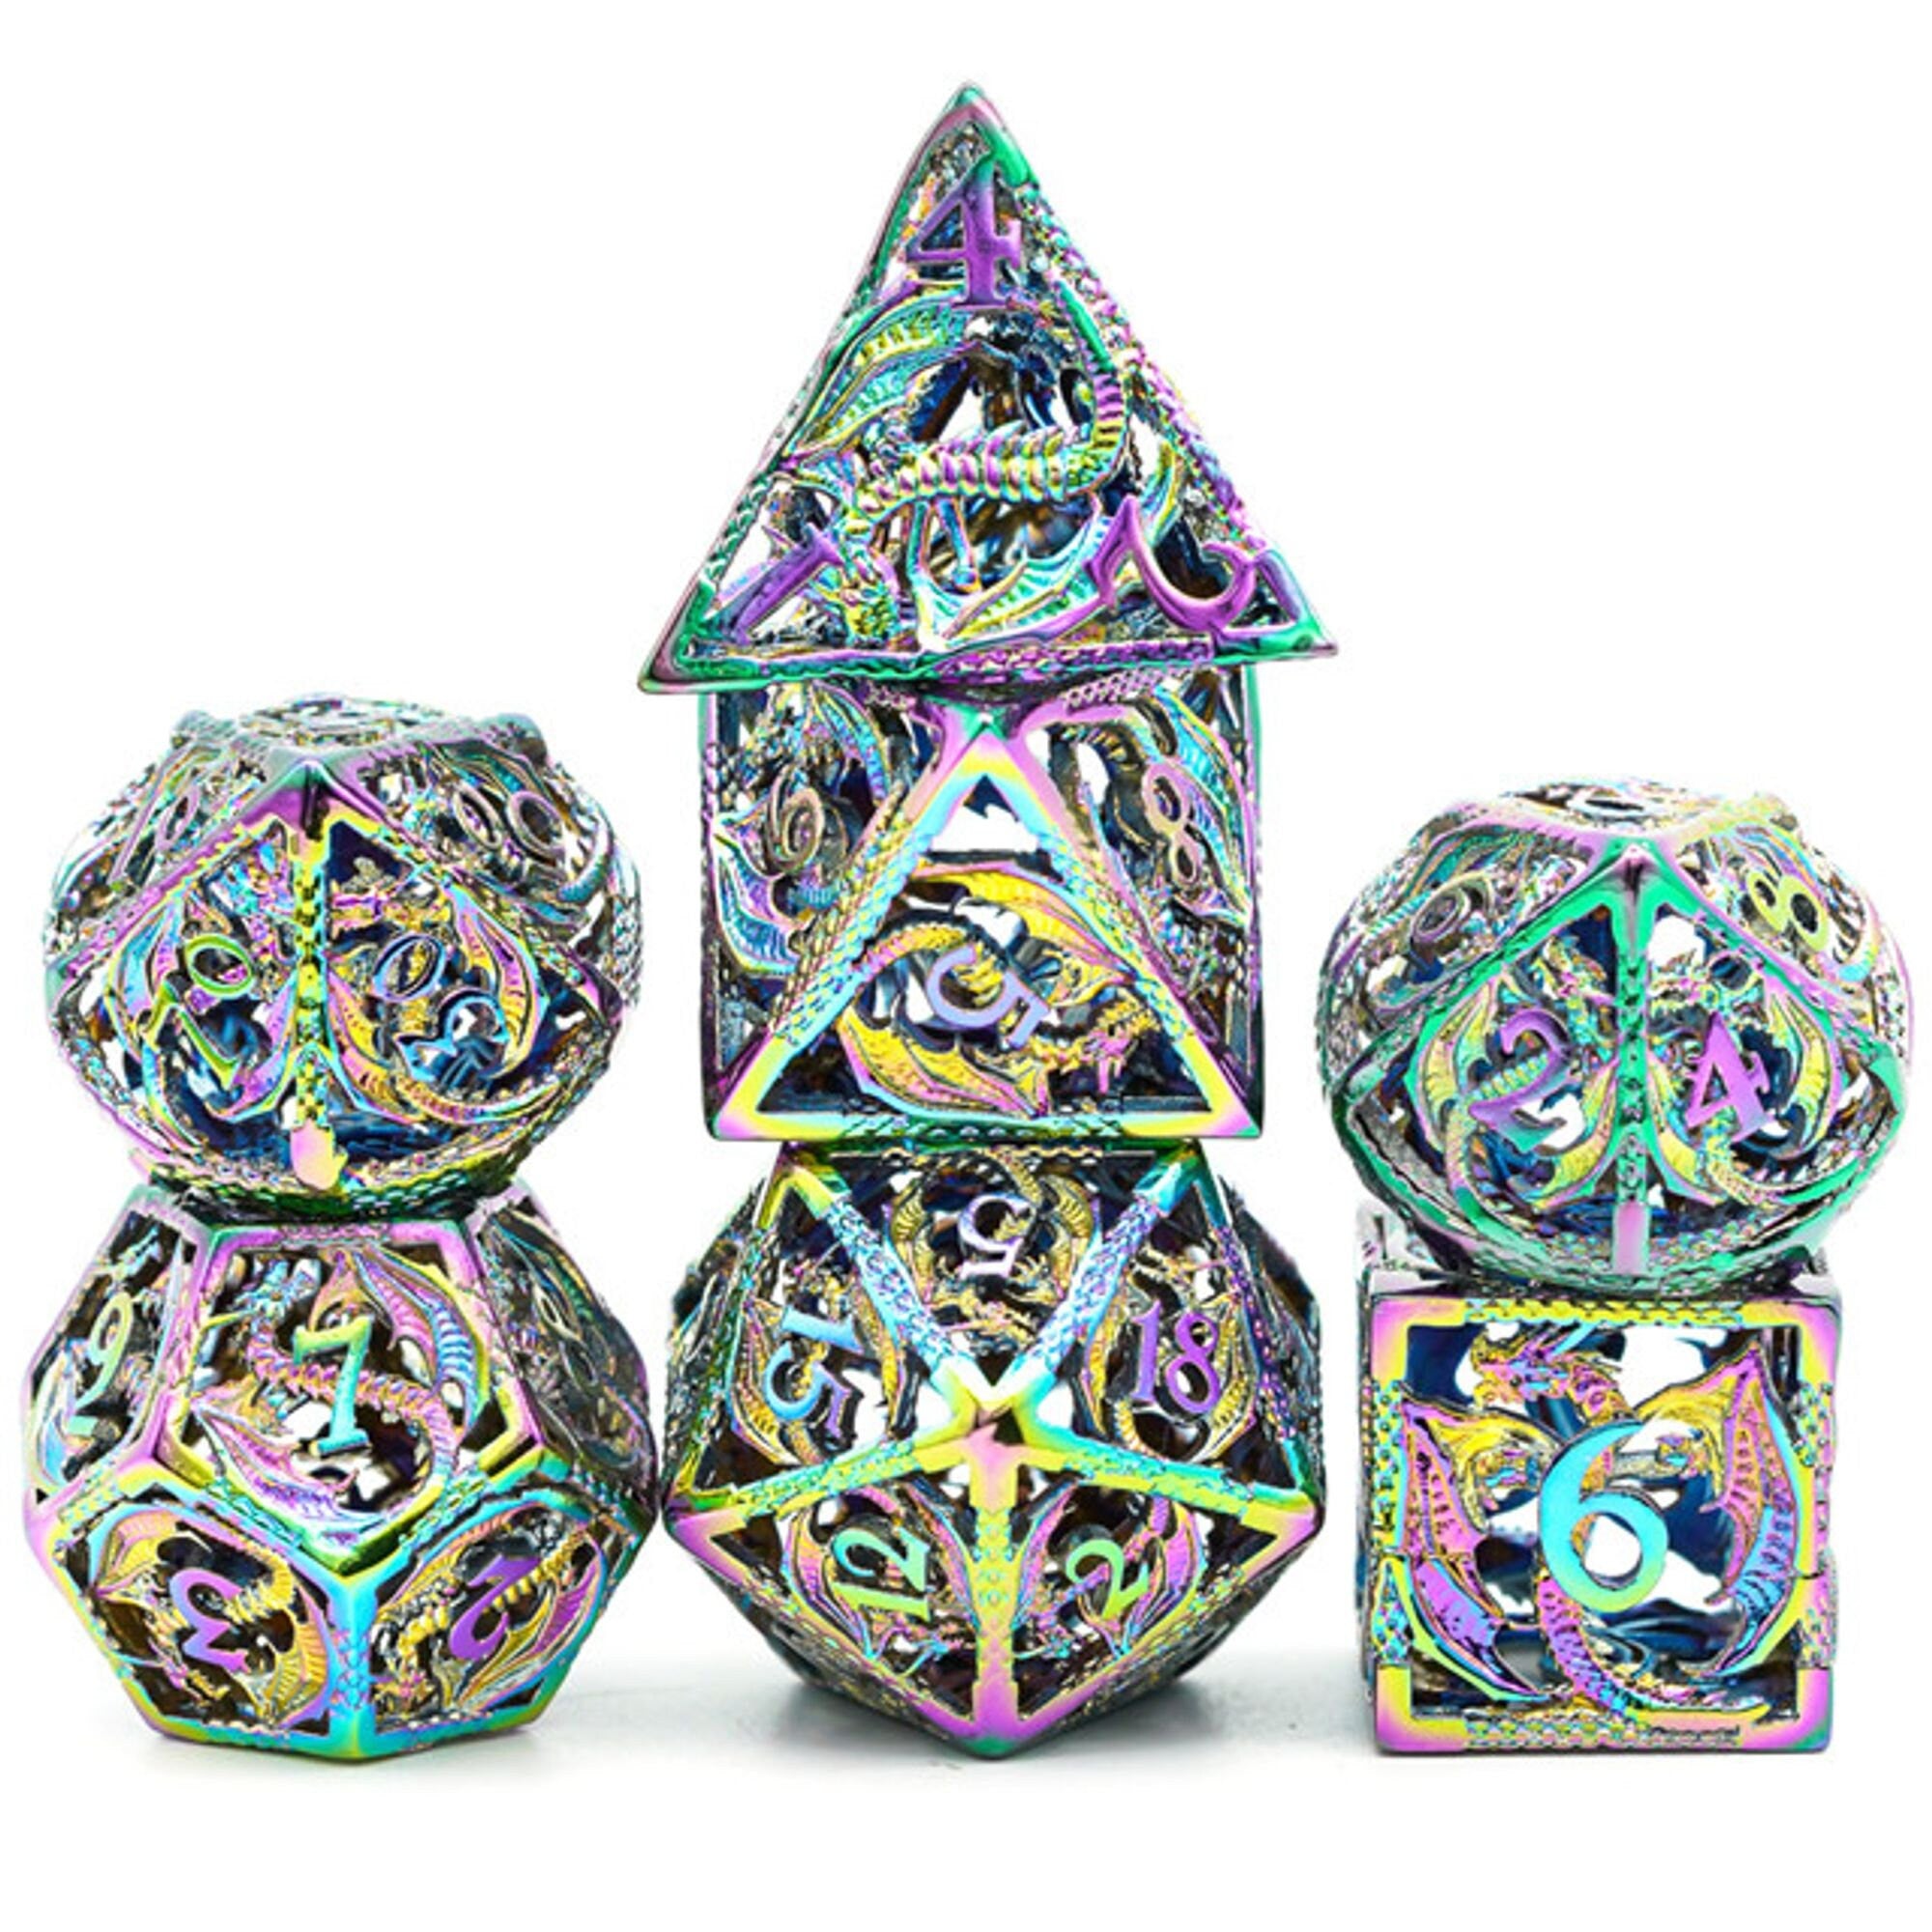 Hollow Holographic Draconic Flying Dragon Metal TTRPG/DND DICE SET - Dicemaniac